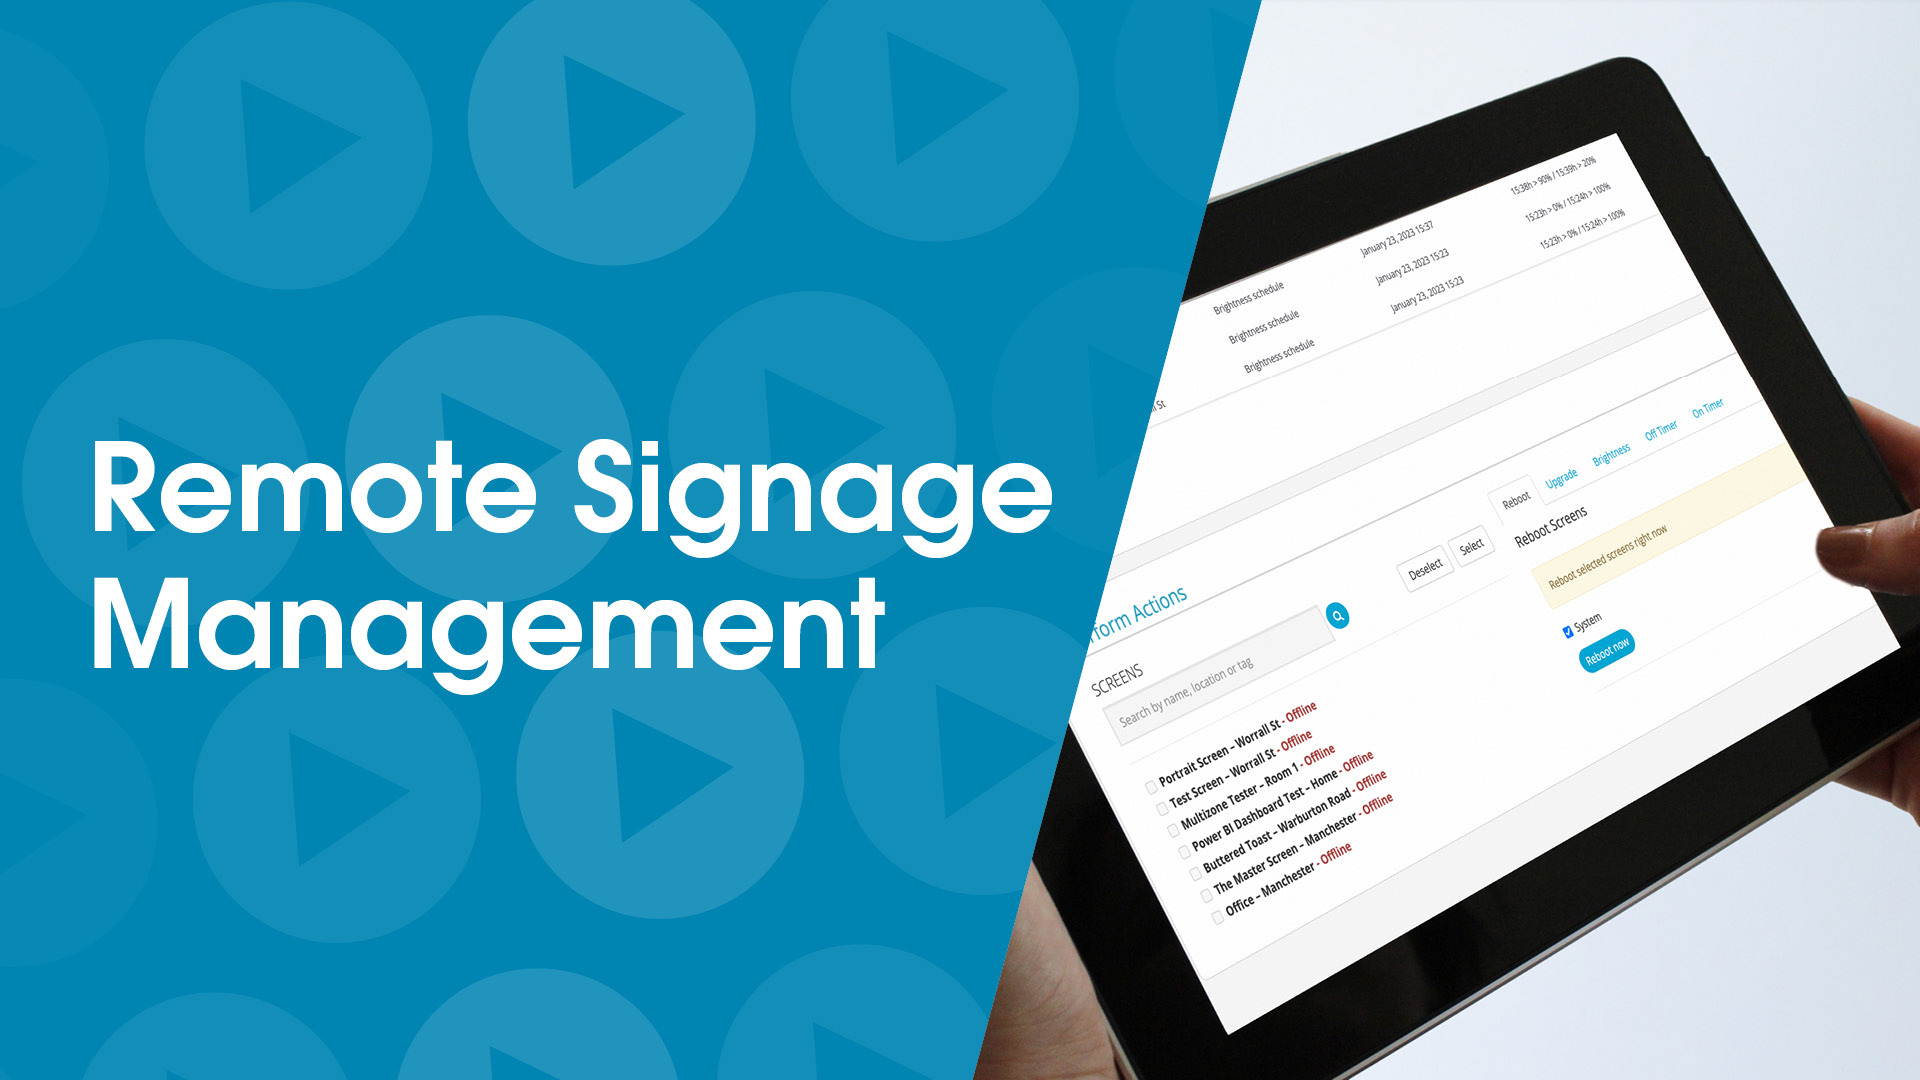 The Benefits of Remote Signage Management